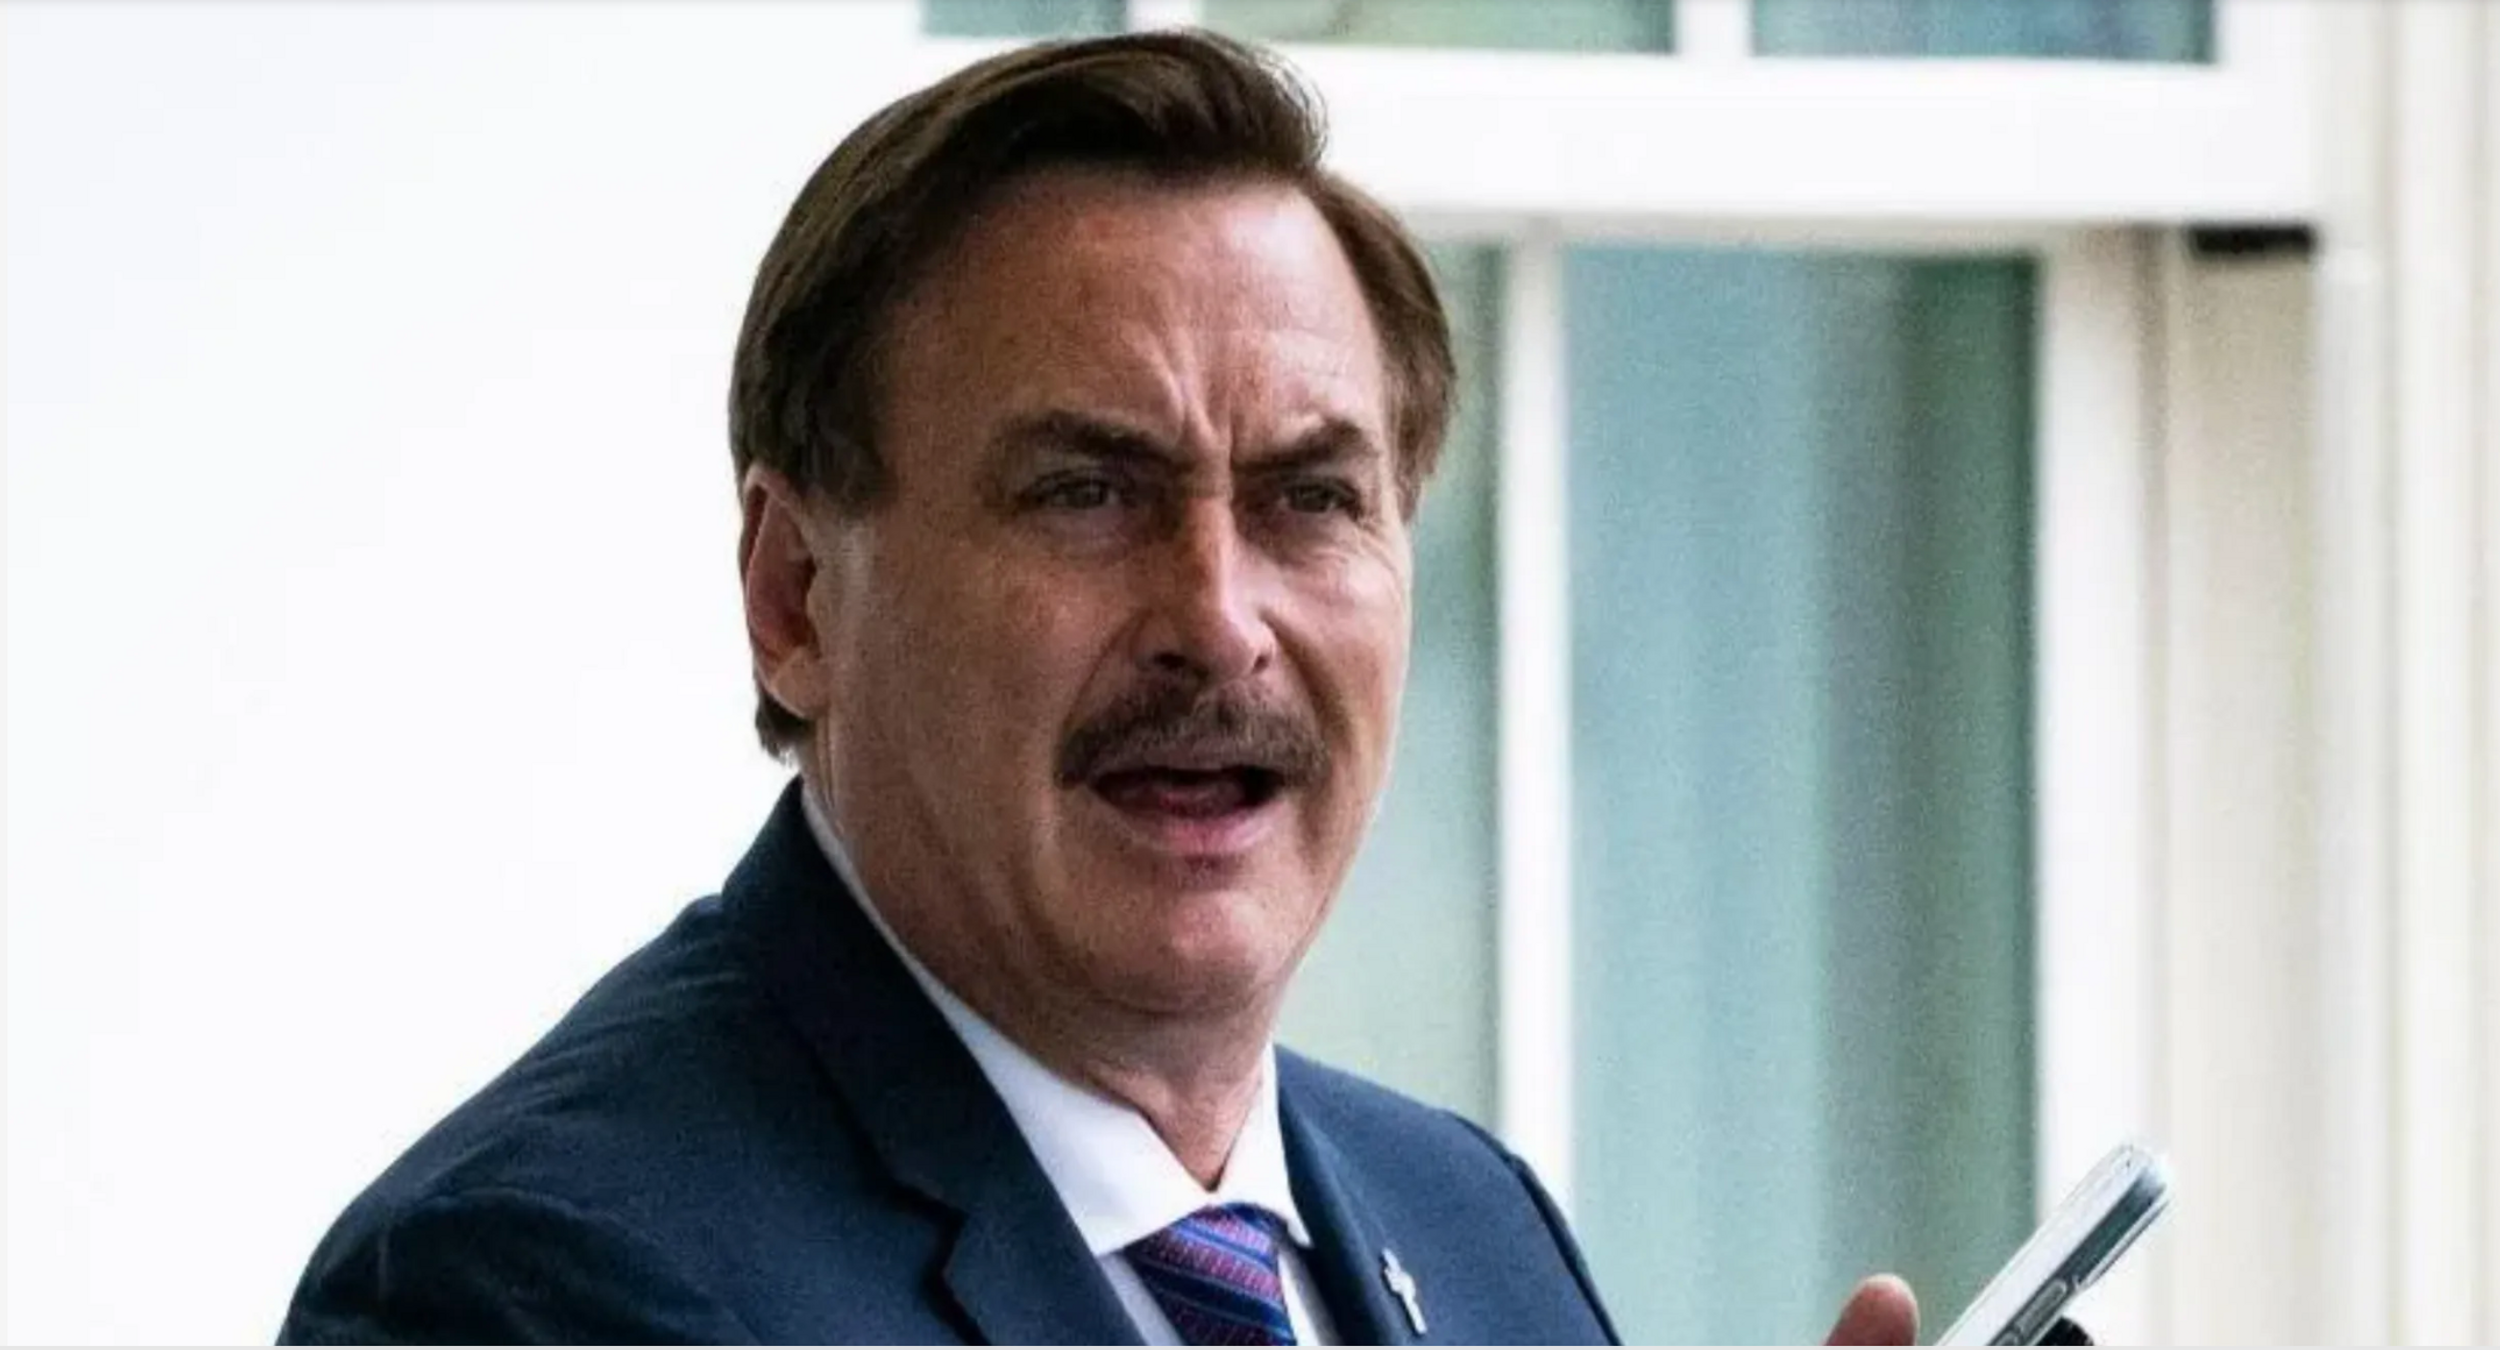 MyPillow Guy Accuses Colorado Dem of 'Committing a Murder' Before Instantly Backtracking When Challenged